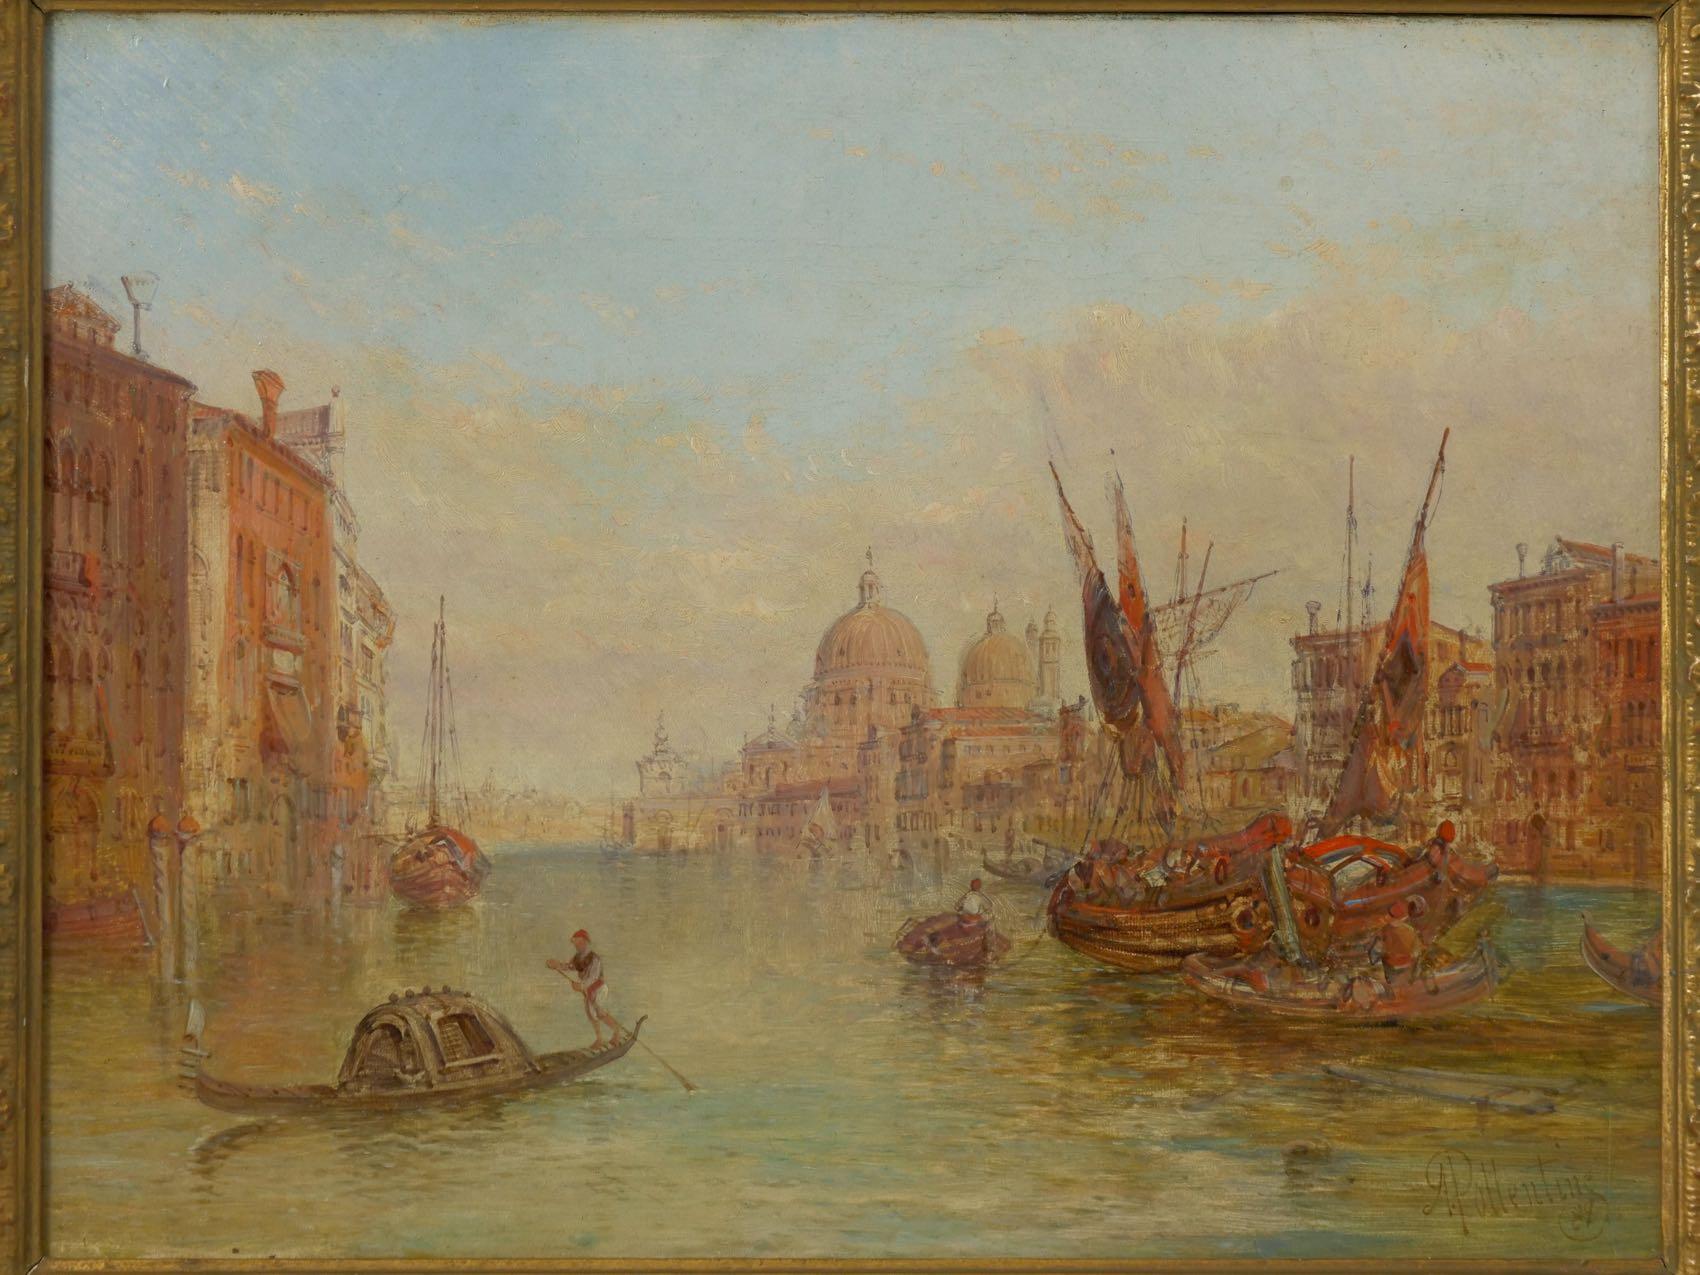 Typical of Alfred Pollentine's Venetian views, the present painting is incredibly romantic and full of life. With a palette full of pastels and vibrant colors, he mixes colors with an eye towards realism and a brush-stroke bordering on